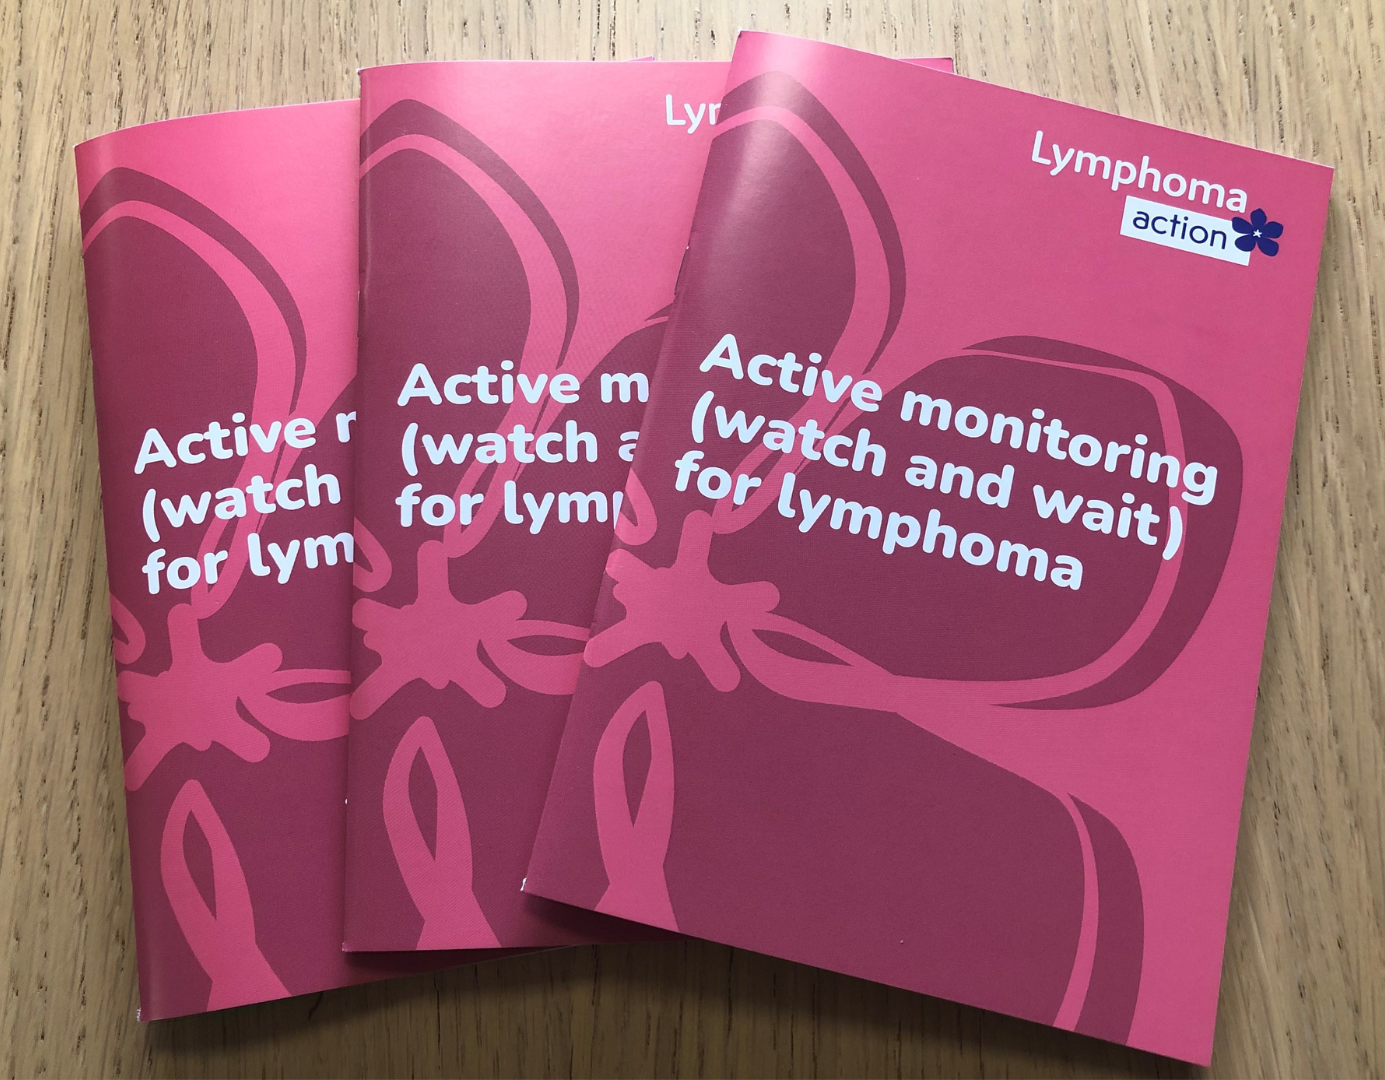 Three copies of the Active monitoring book on a wooden table. The book has a pink cover with periwinkle design and Lymphoma Action logo. Title of book is Active monitoring (watch and wait) for lymphoma.